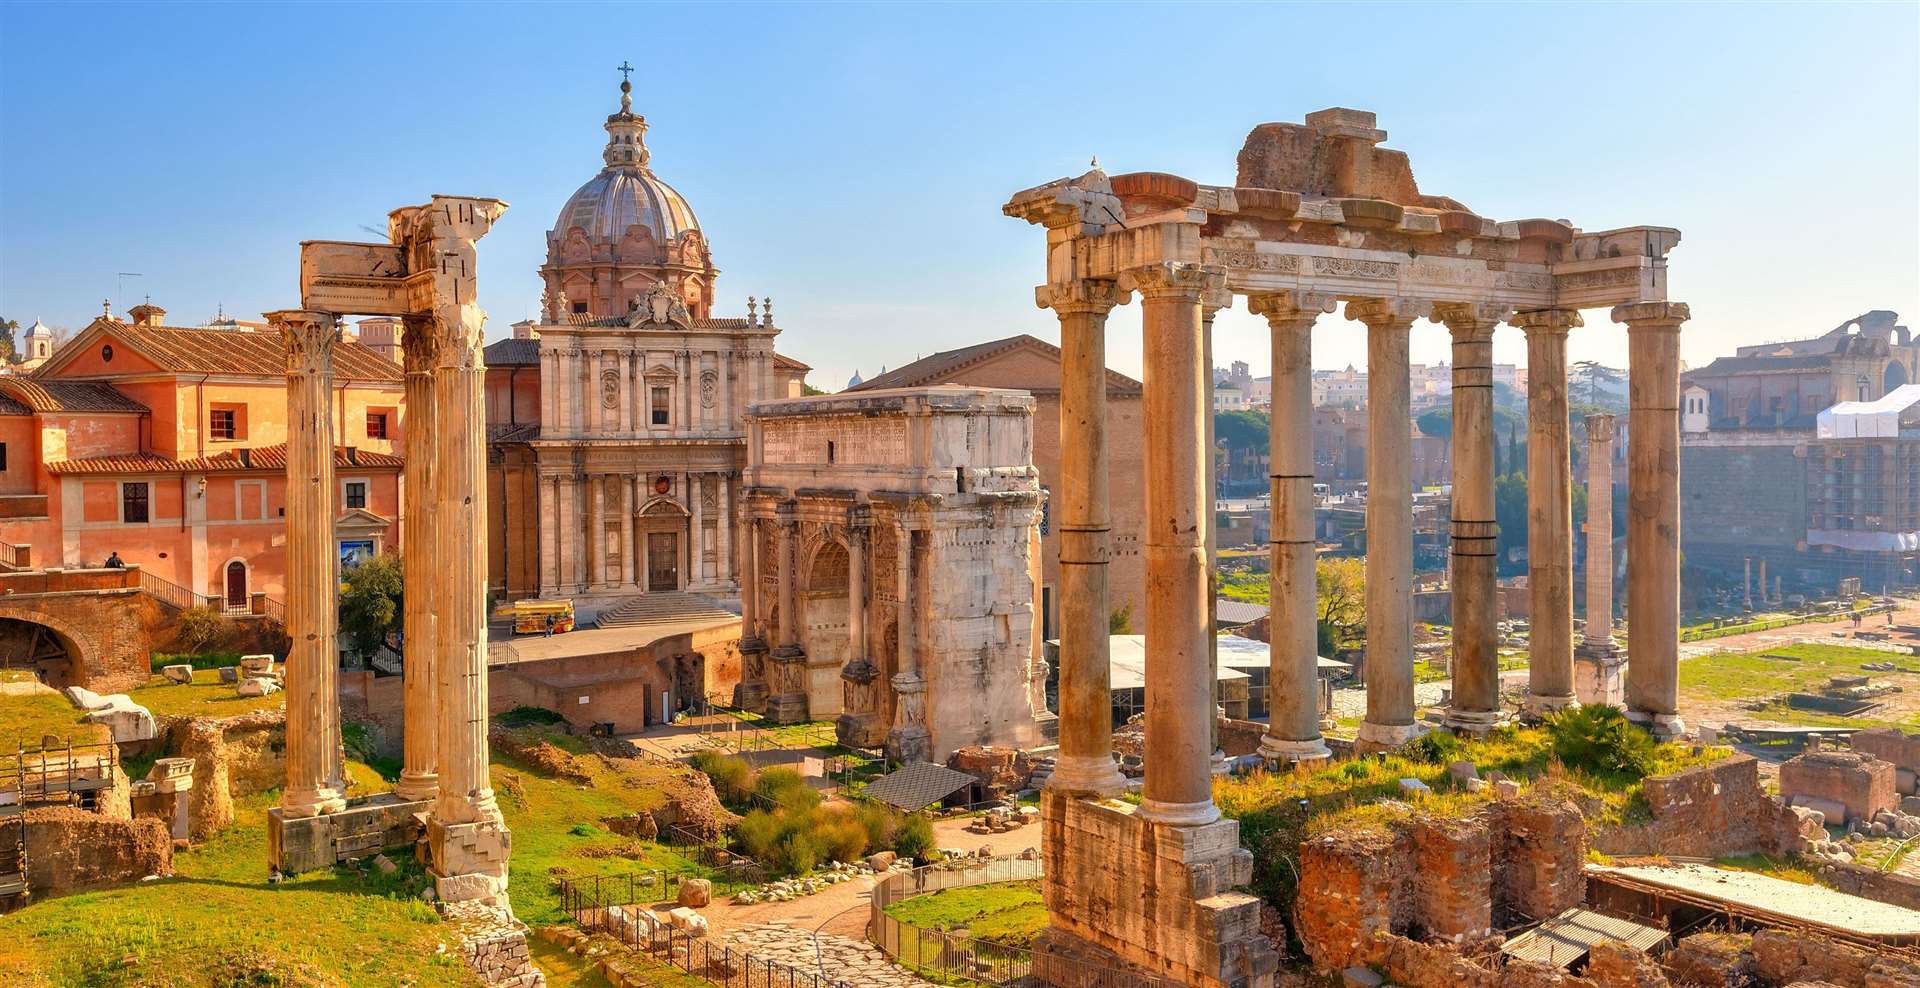 Rome holidays will introduce you to Europe’s most gloriously cinematic city, spectacularly beautiful and humming with life. Rome city breaks are all about experiencing this magic.